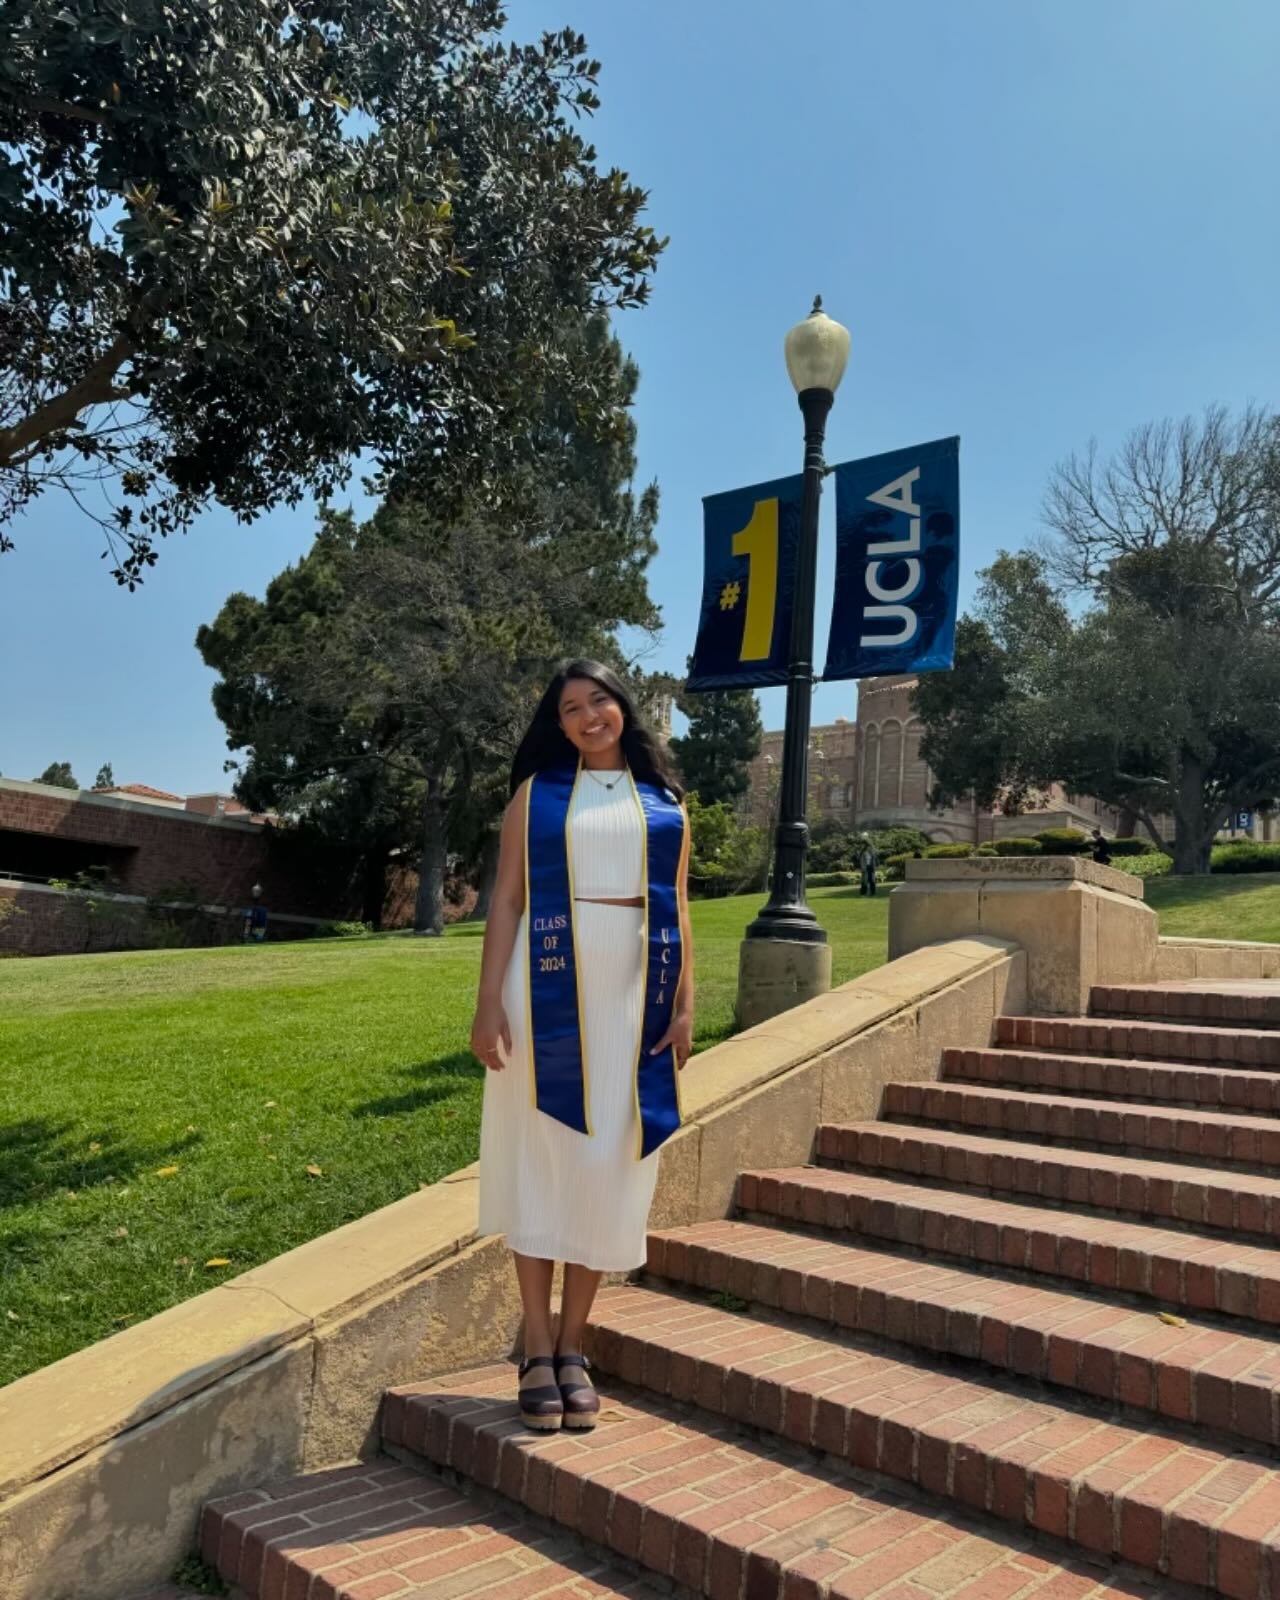 Congrats Shivani for graduating from UCLA with an M.S. in Bioengineering! Looking forward to seeing you do amazing things!